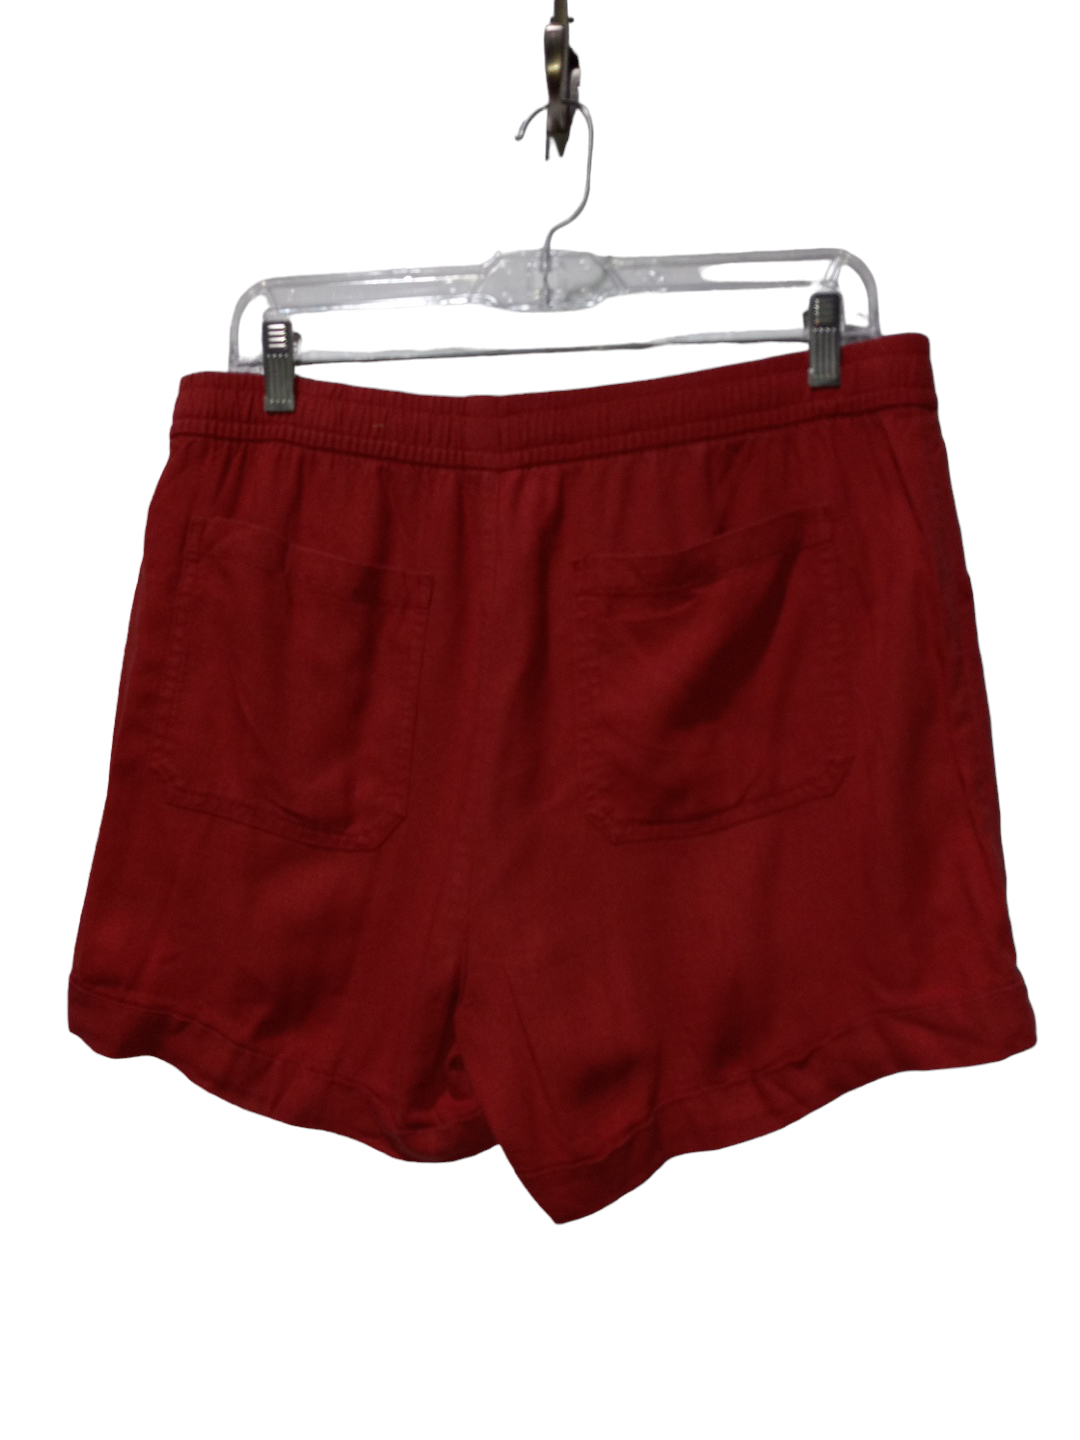 Red Shorts Old Navy, Size M